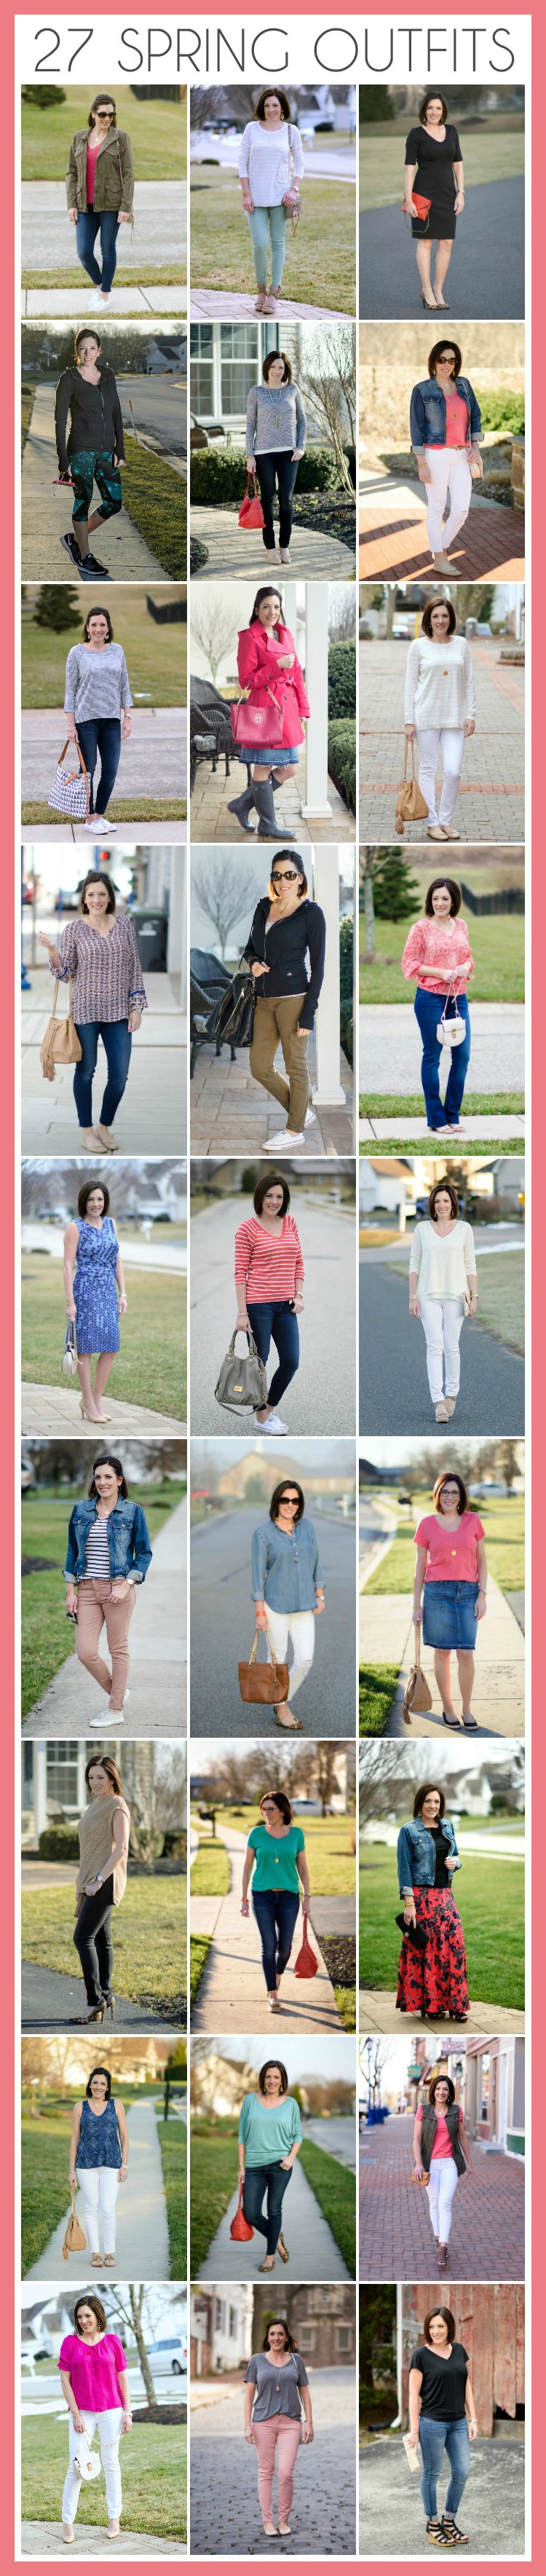 27 Spring Outfits for Women Over 40